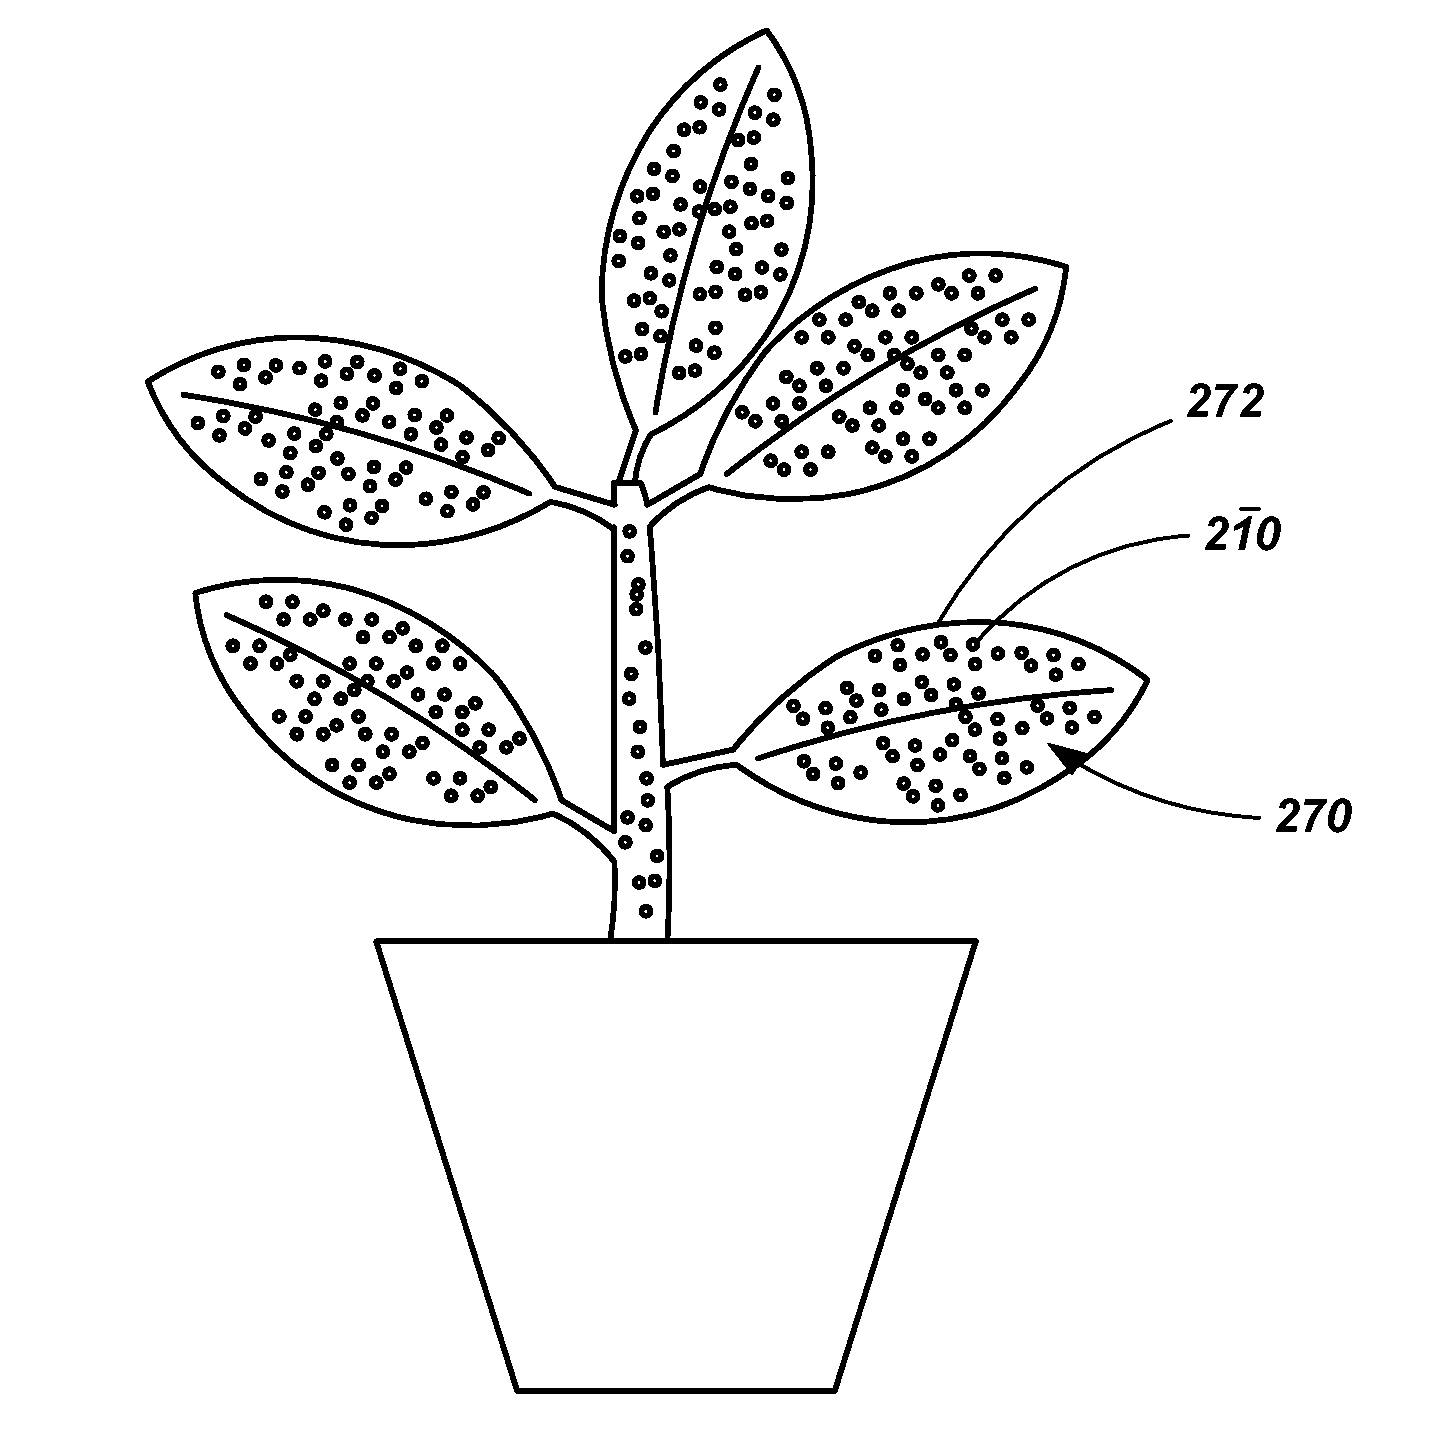 Apparatuses, systems and methods for enhancing plant growth